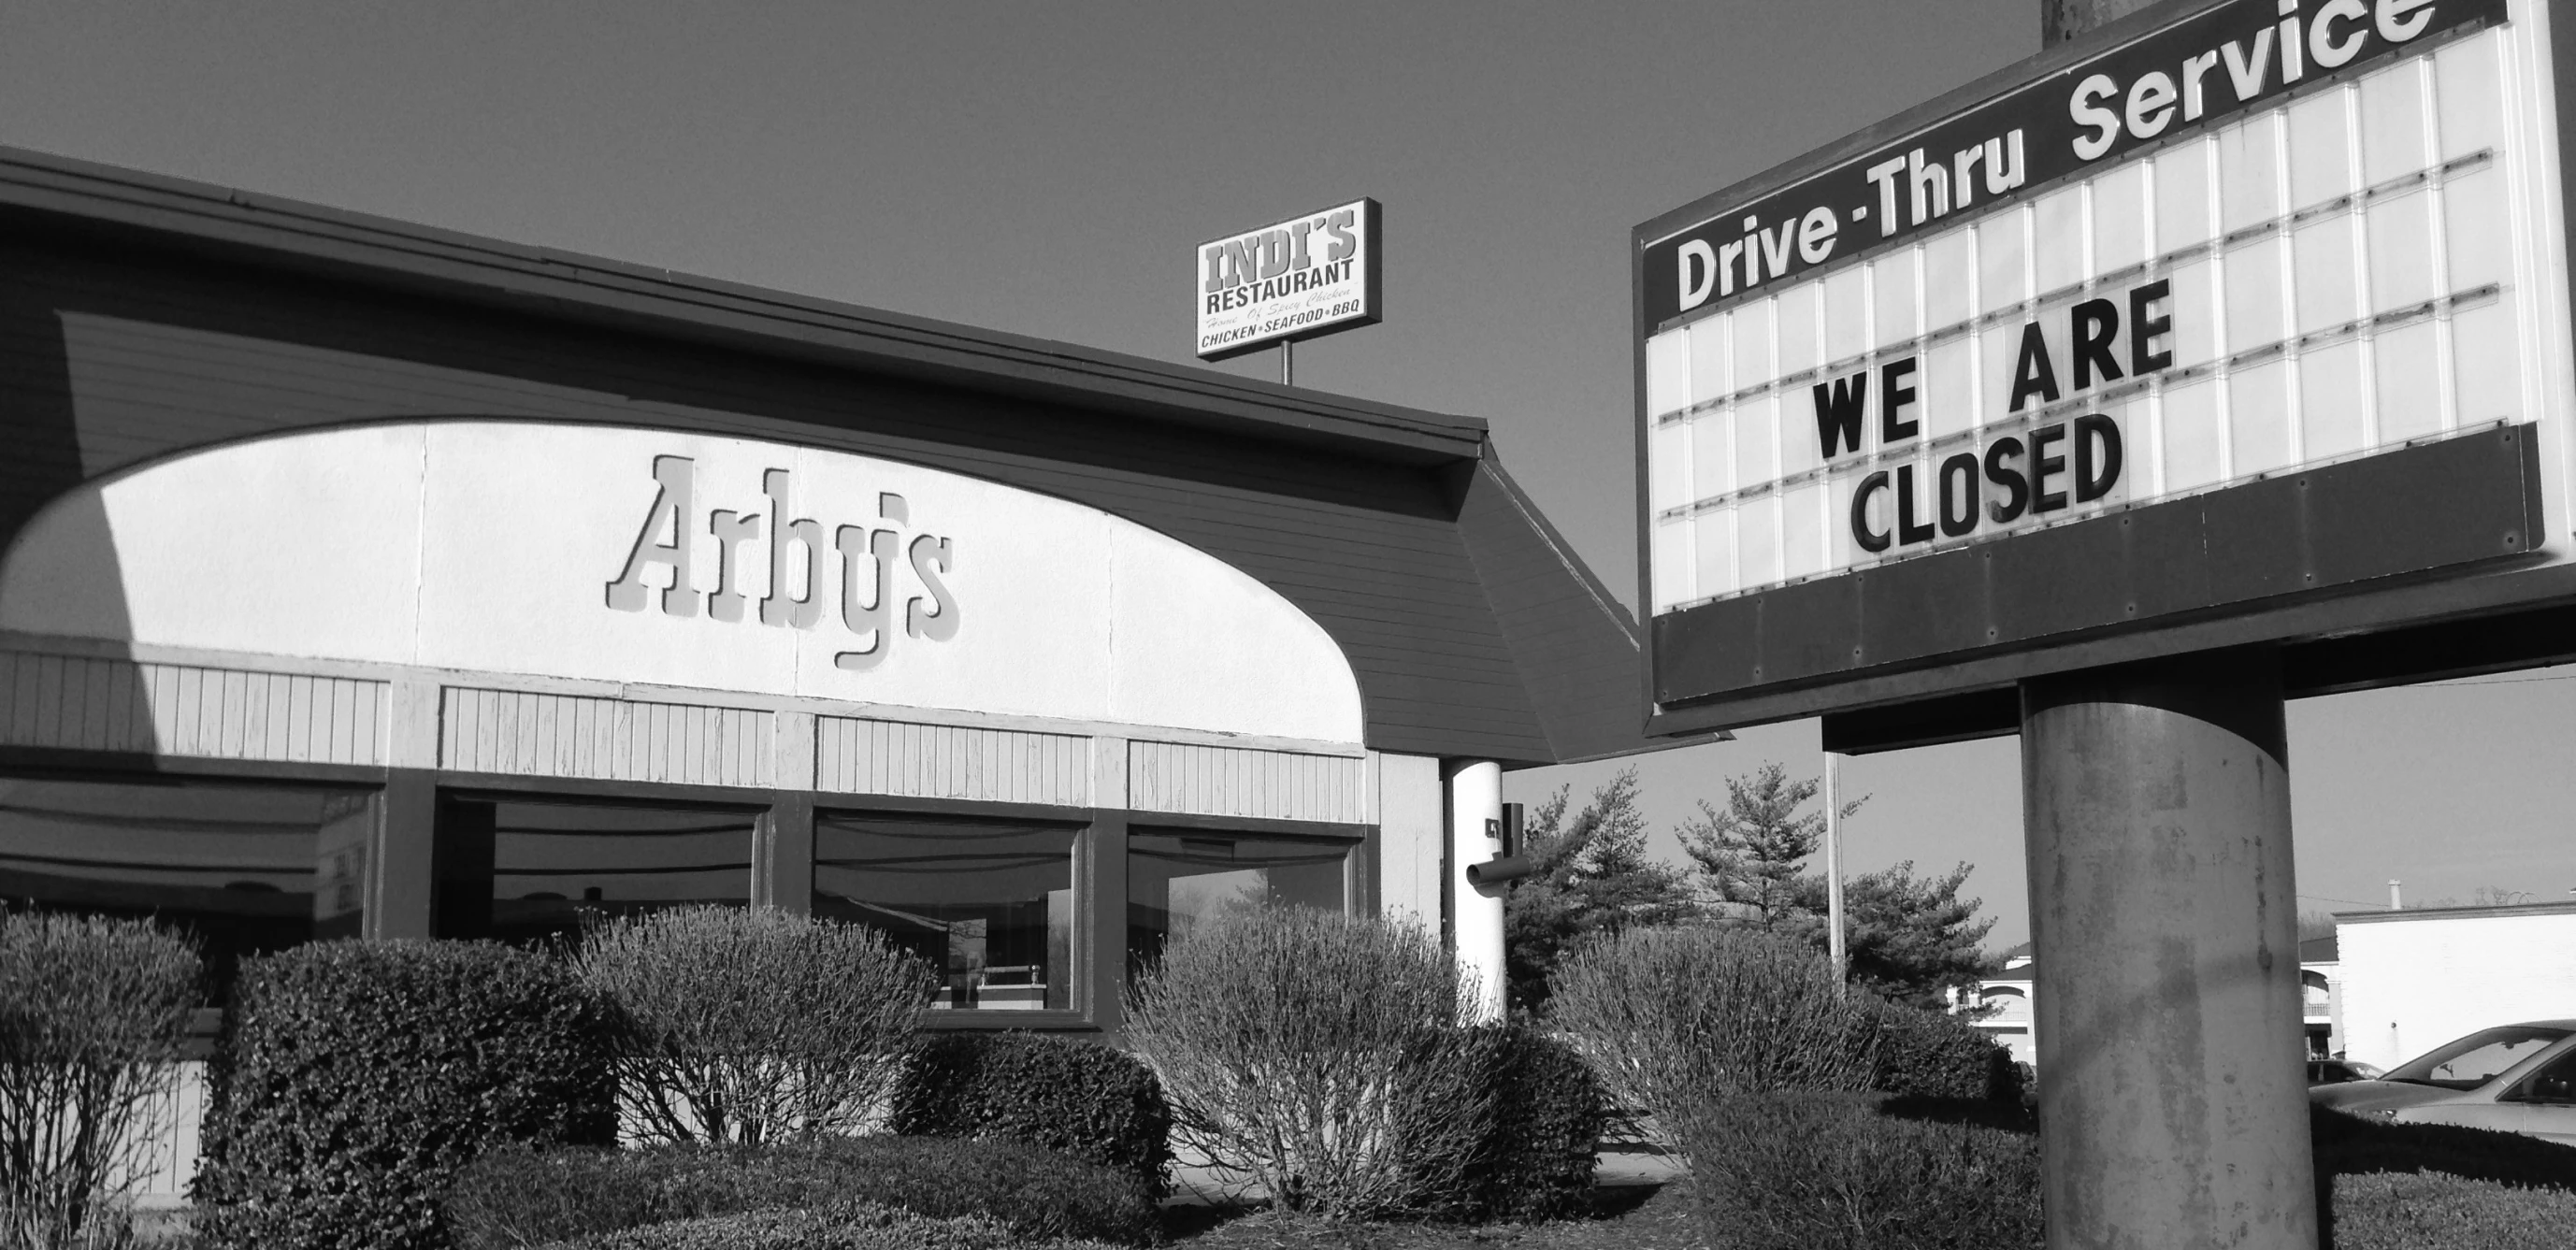 a black and white picture of a drive - thru service building